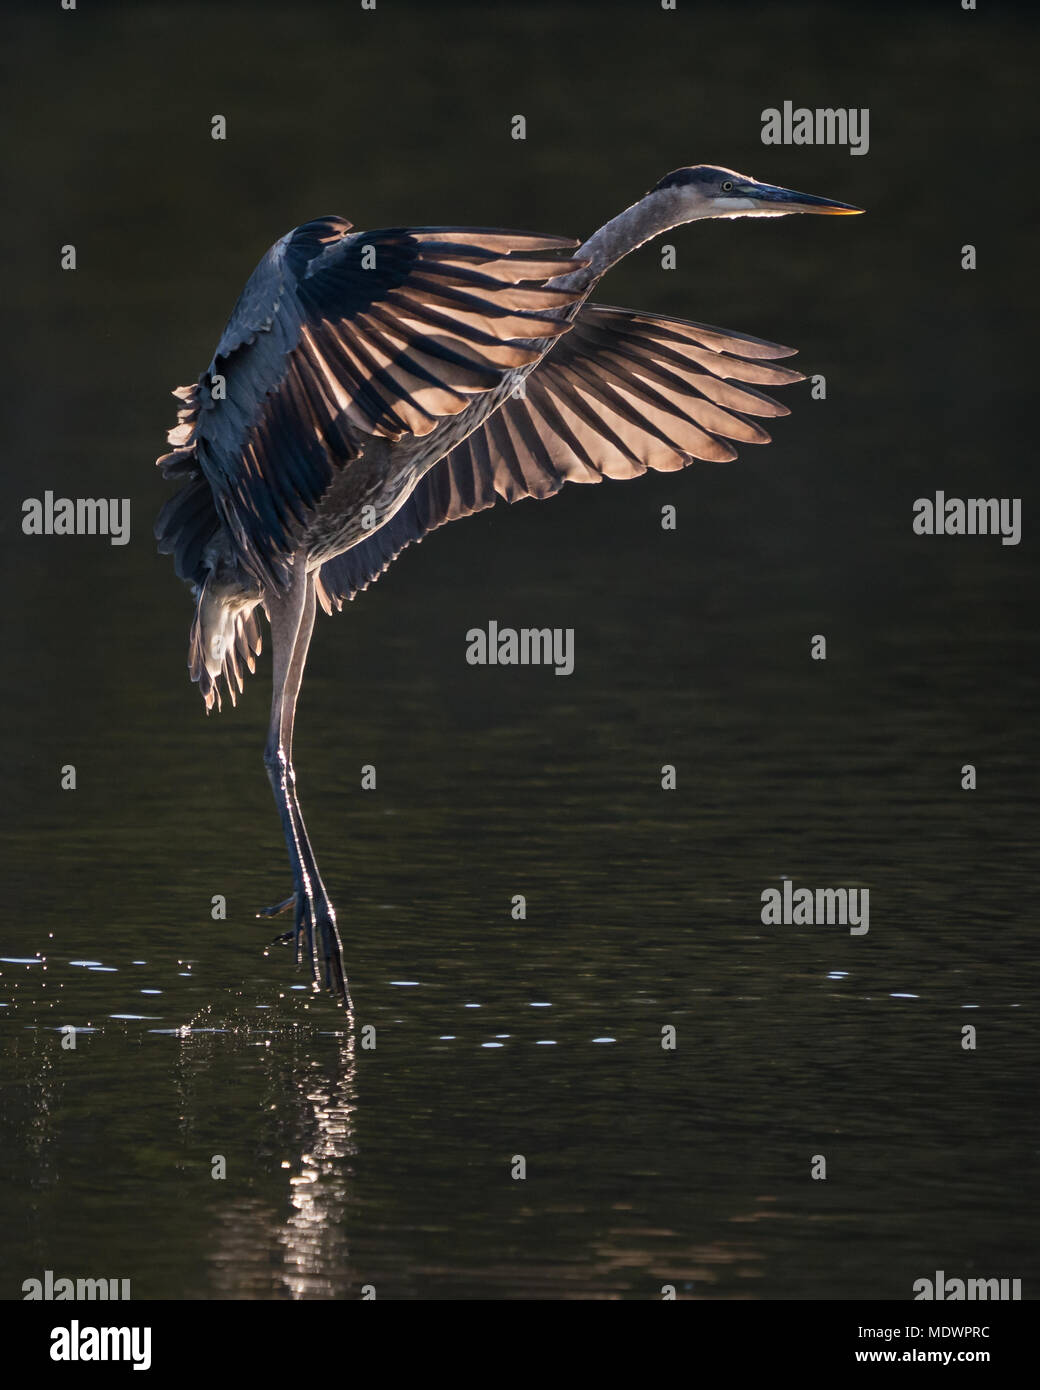 Backlit Great Blue Heron Taking off from Water Stock Photo